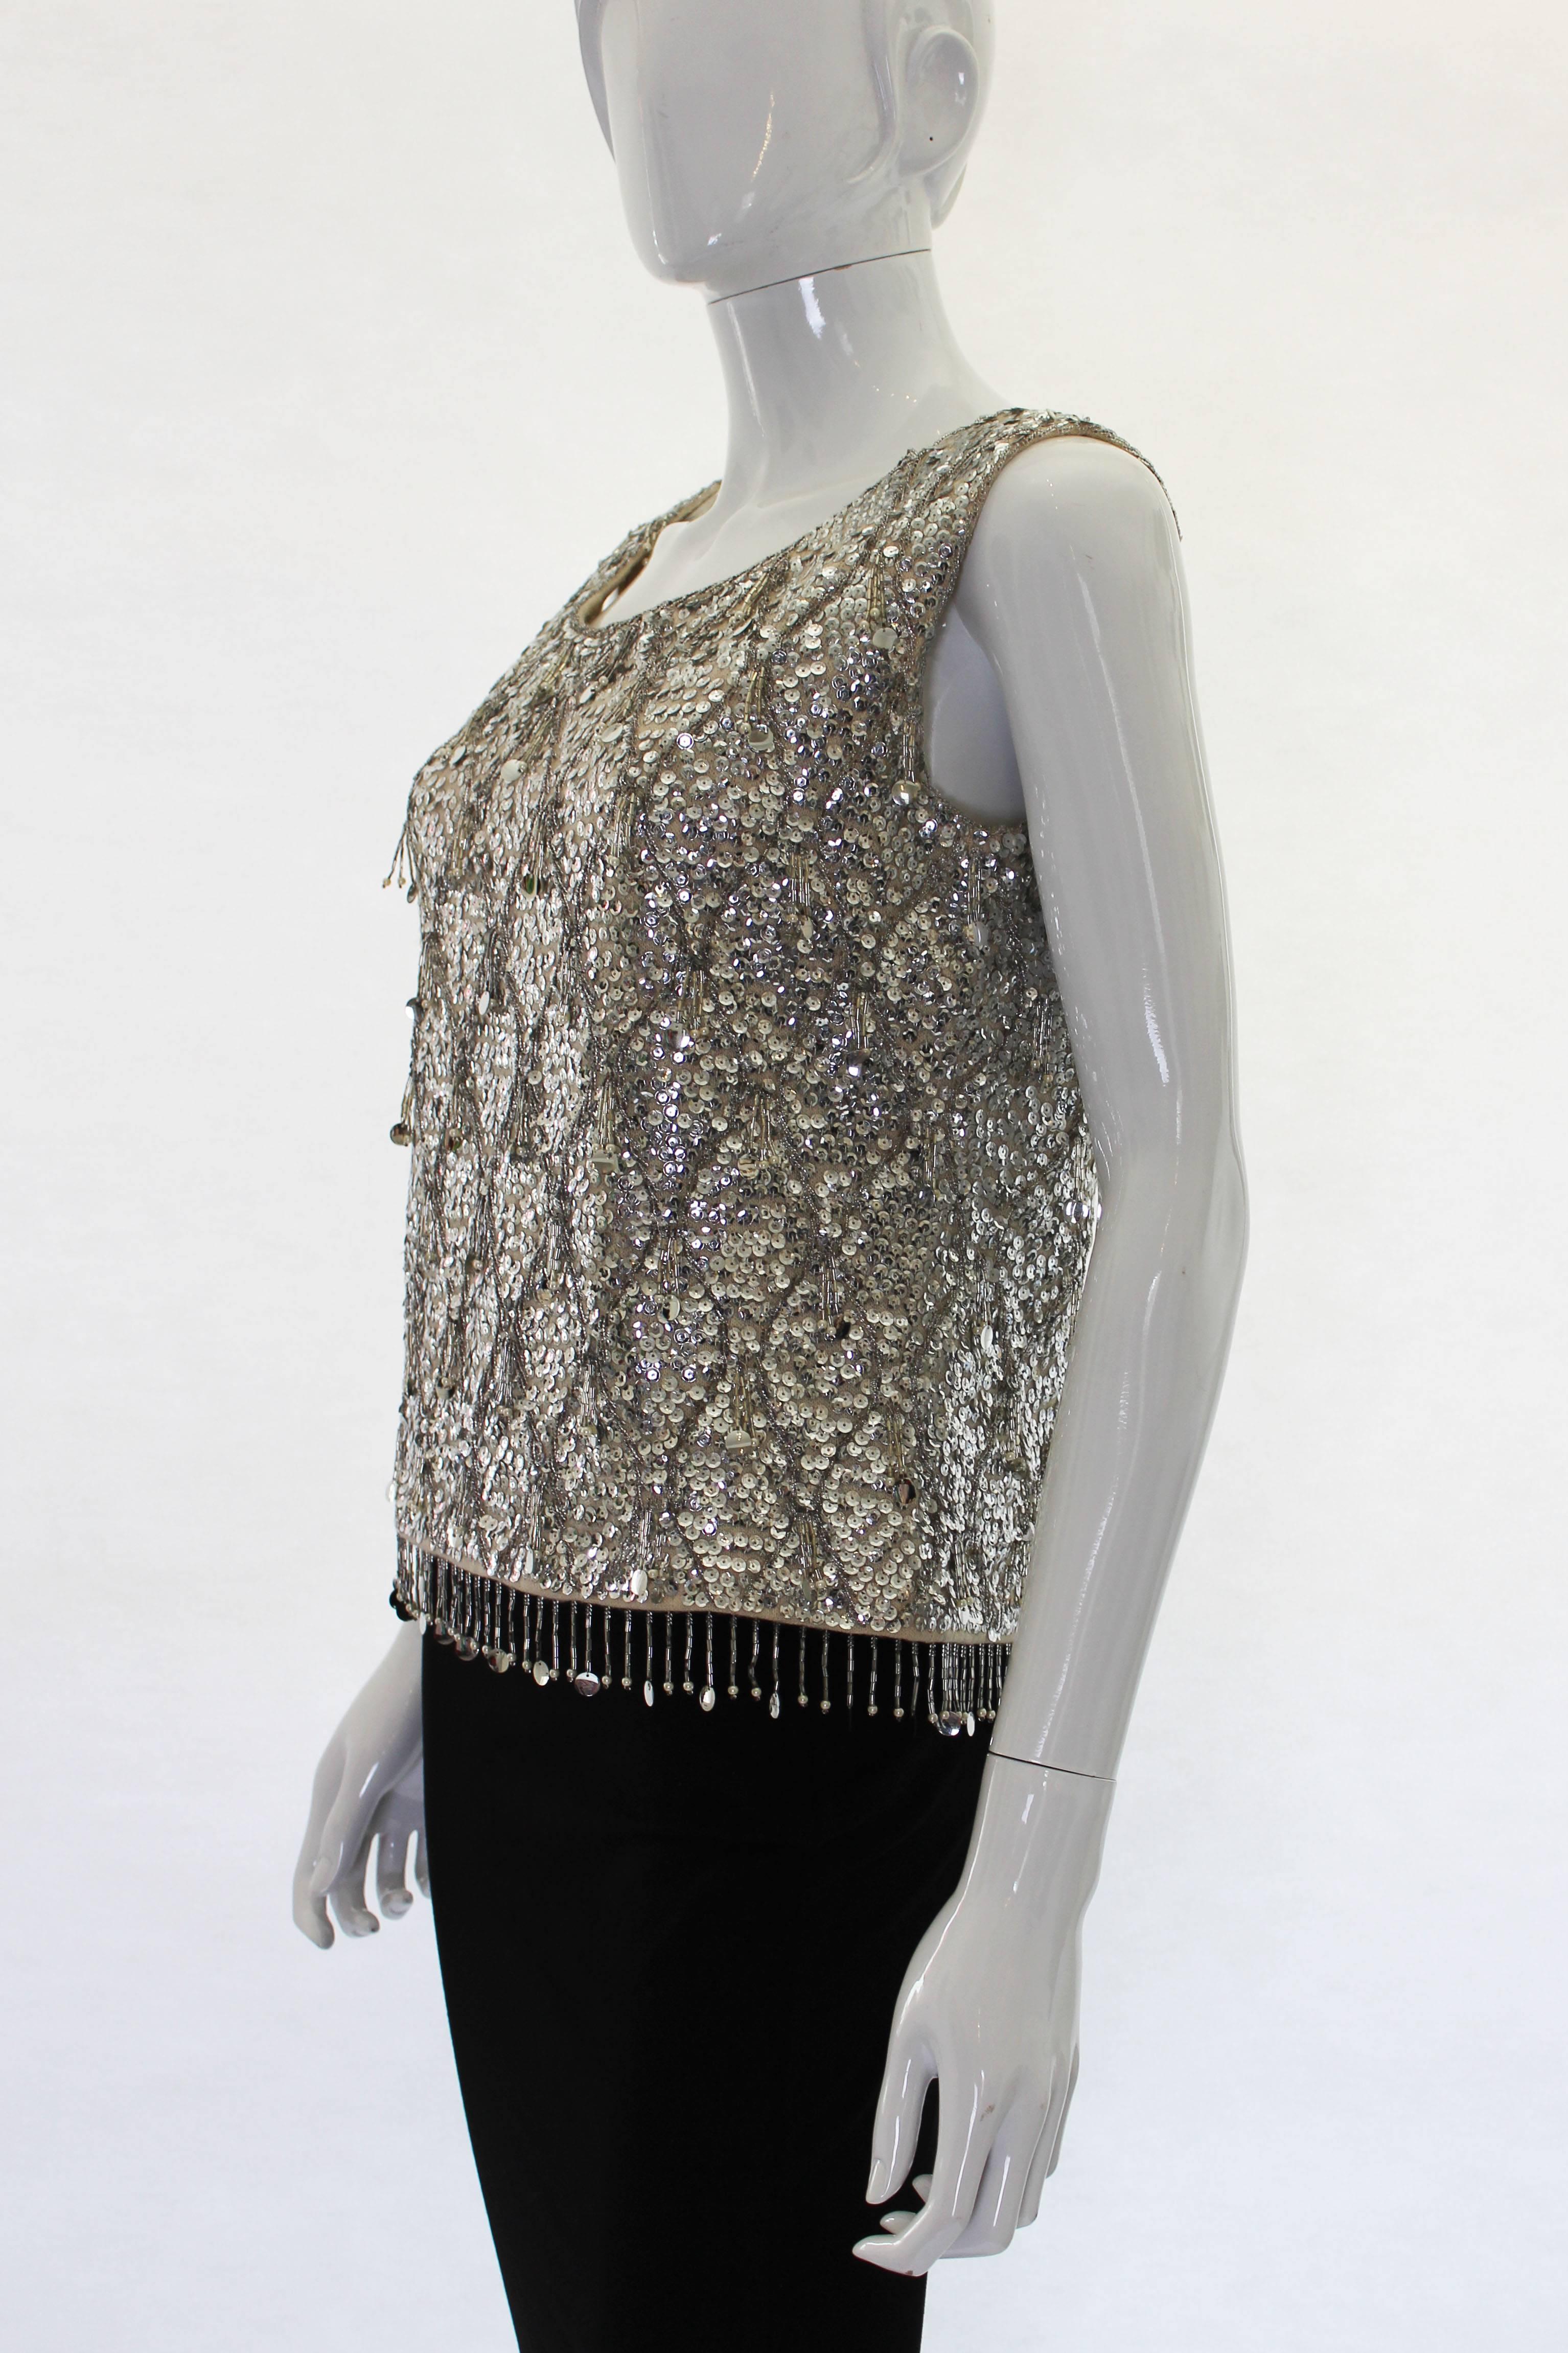 A beautiful beaded and sequin evening top by Alan Lee of Mayfair. The body of the top is made of a soft ivory 100% wool knit. The top is fully lined in an ivory silk and is really beautifully made with an invisible zip at the rear. The whole top is